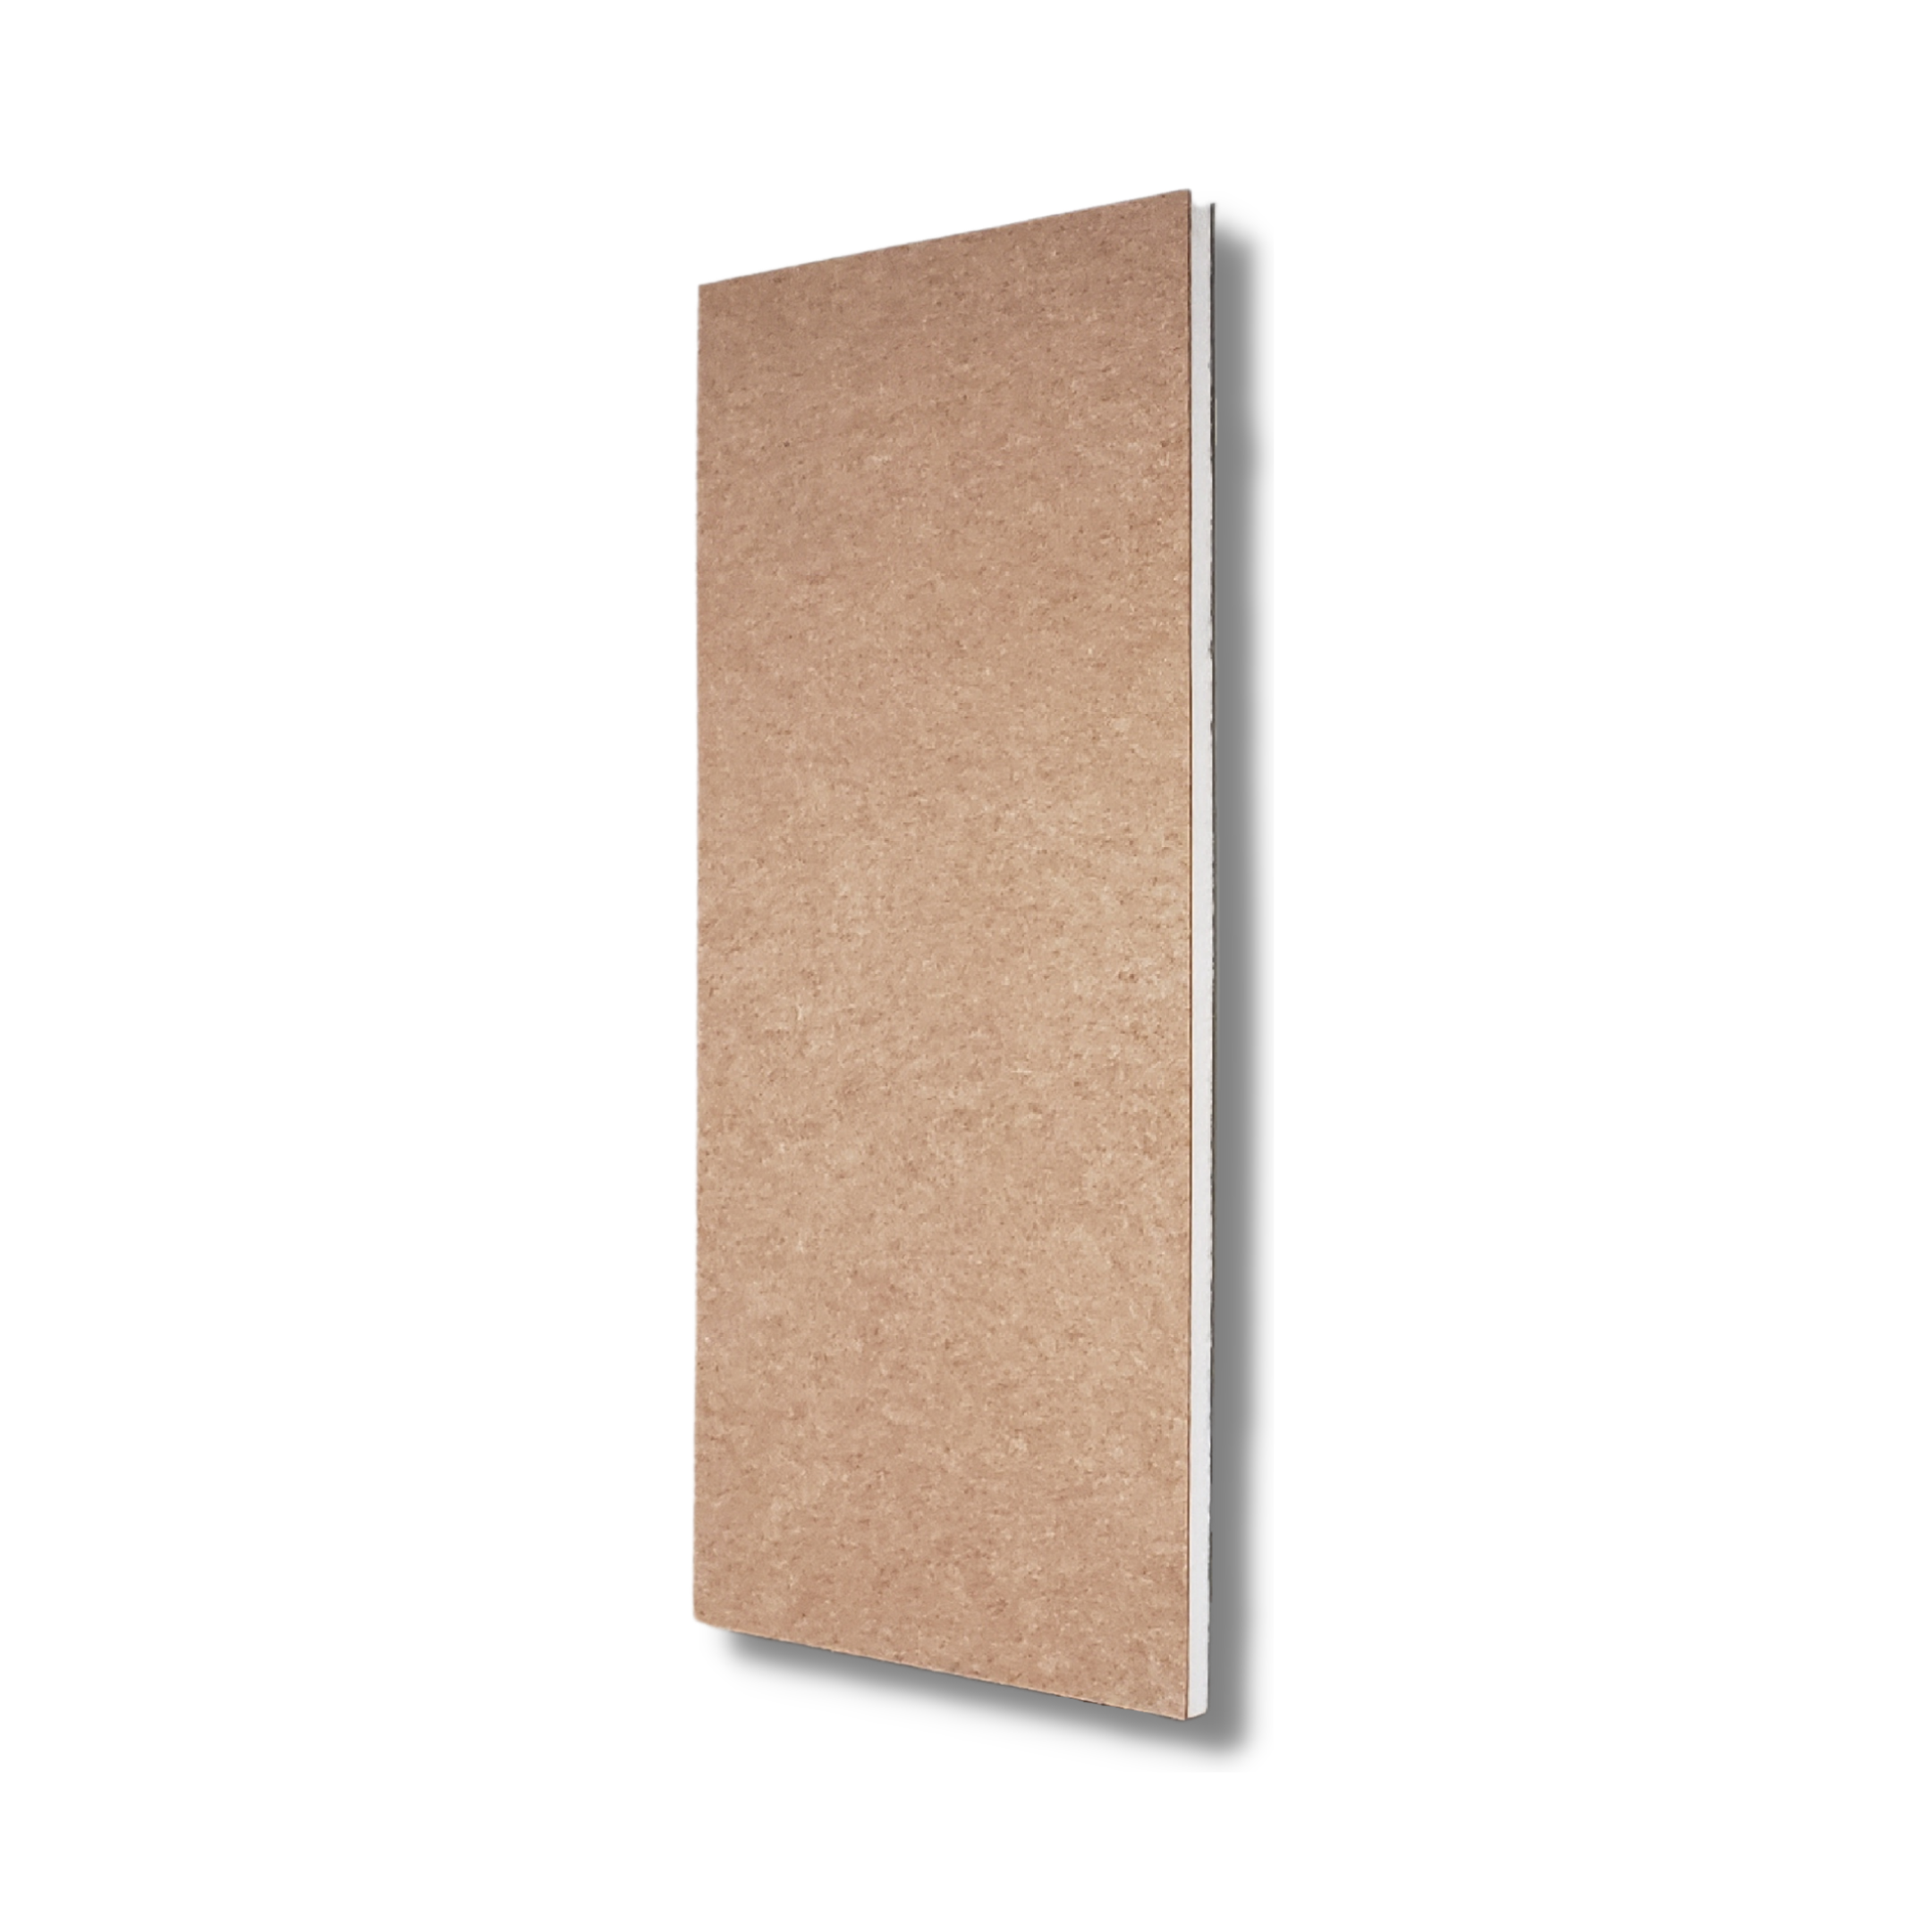 SilentPoly™ 2' x 4' Acoustic Wall Panels - Sound Acoustic Solutions B2B